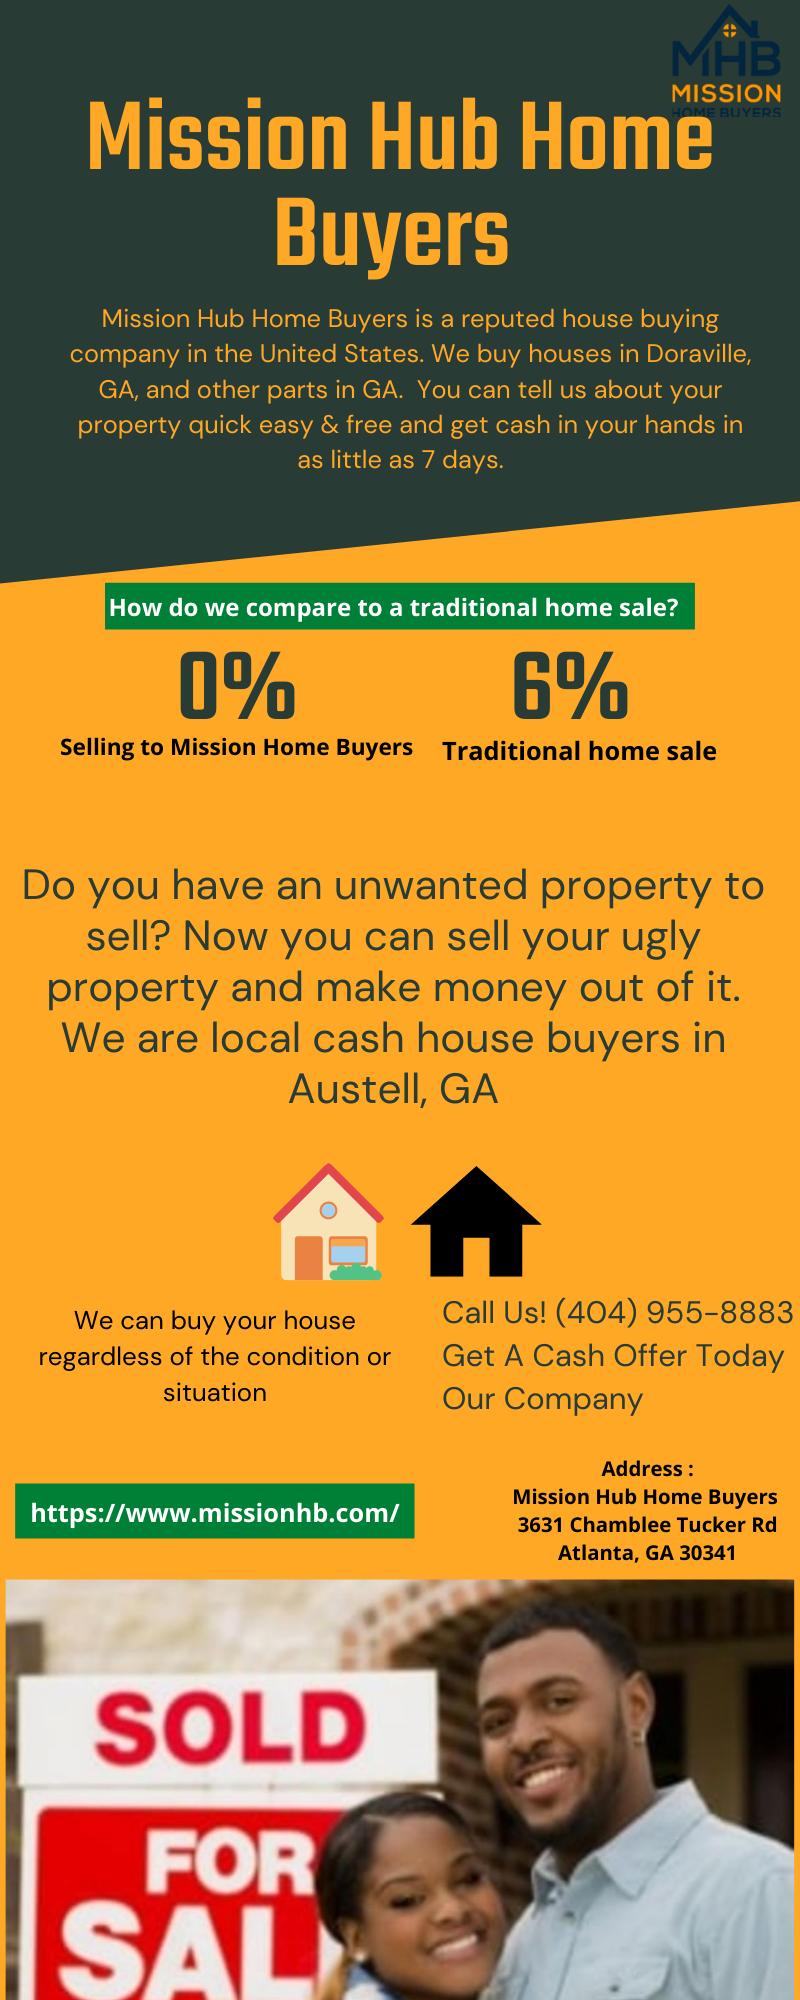 Image - We Buy Houses Doraville, GA 

Mission Hub Home Buyers is a reputed house buying company in the United State...